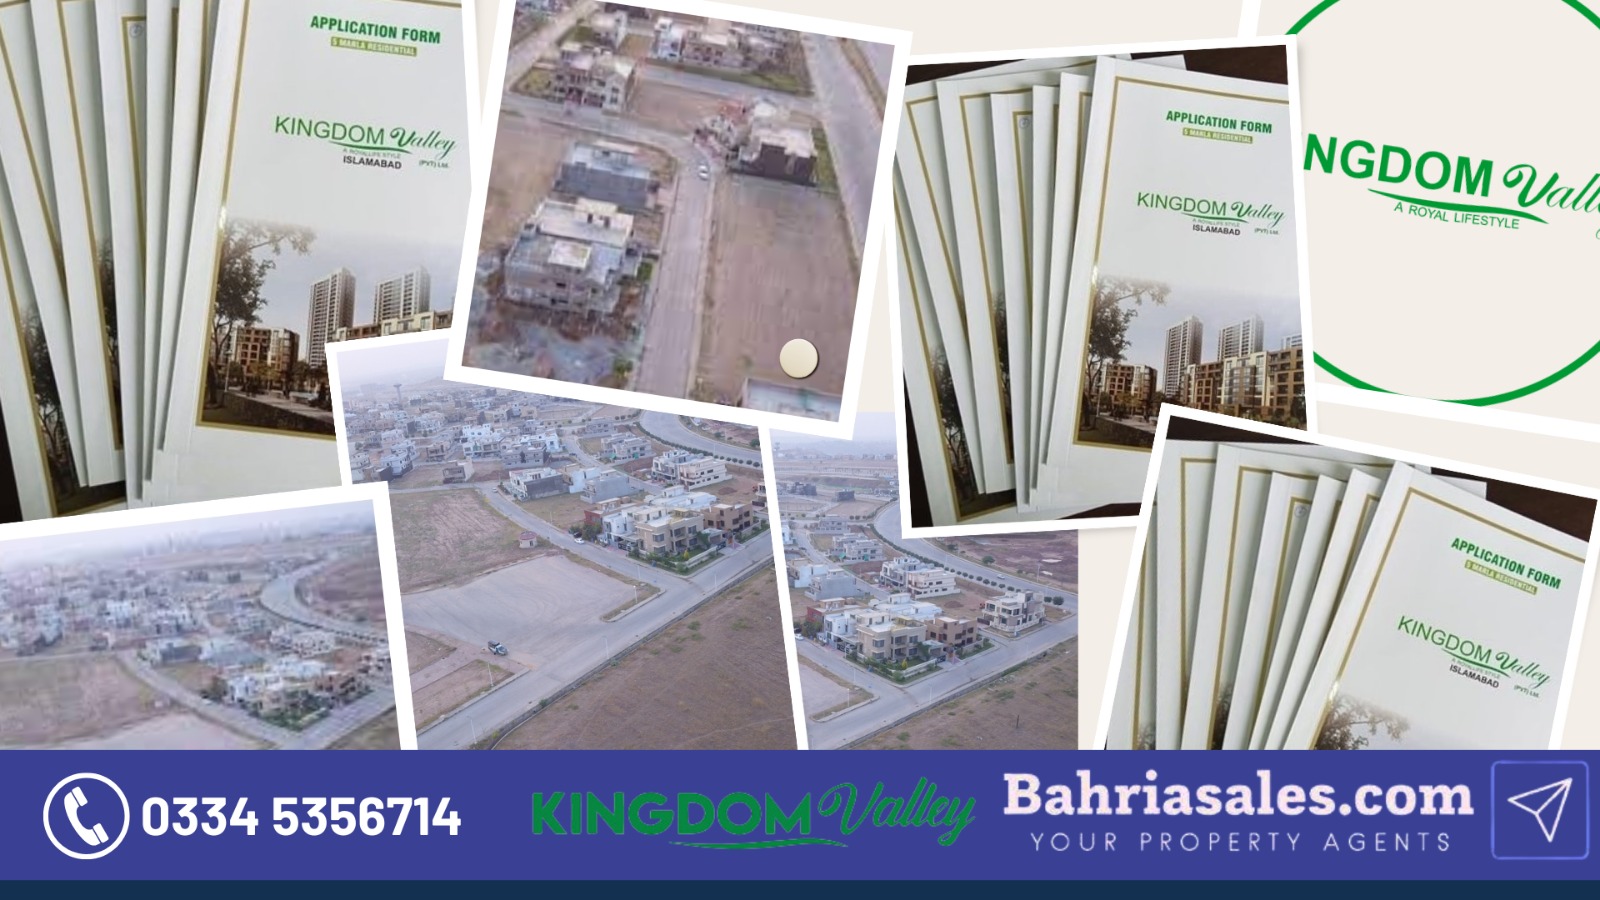 Exclusive 5 Marla Plots Files Kingdom Valley Islamabad, Office No 5 , Bahria Spring Commercial , Bahria To,Punjab,Pakistan